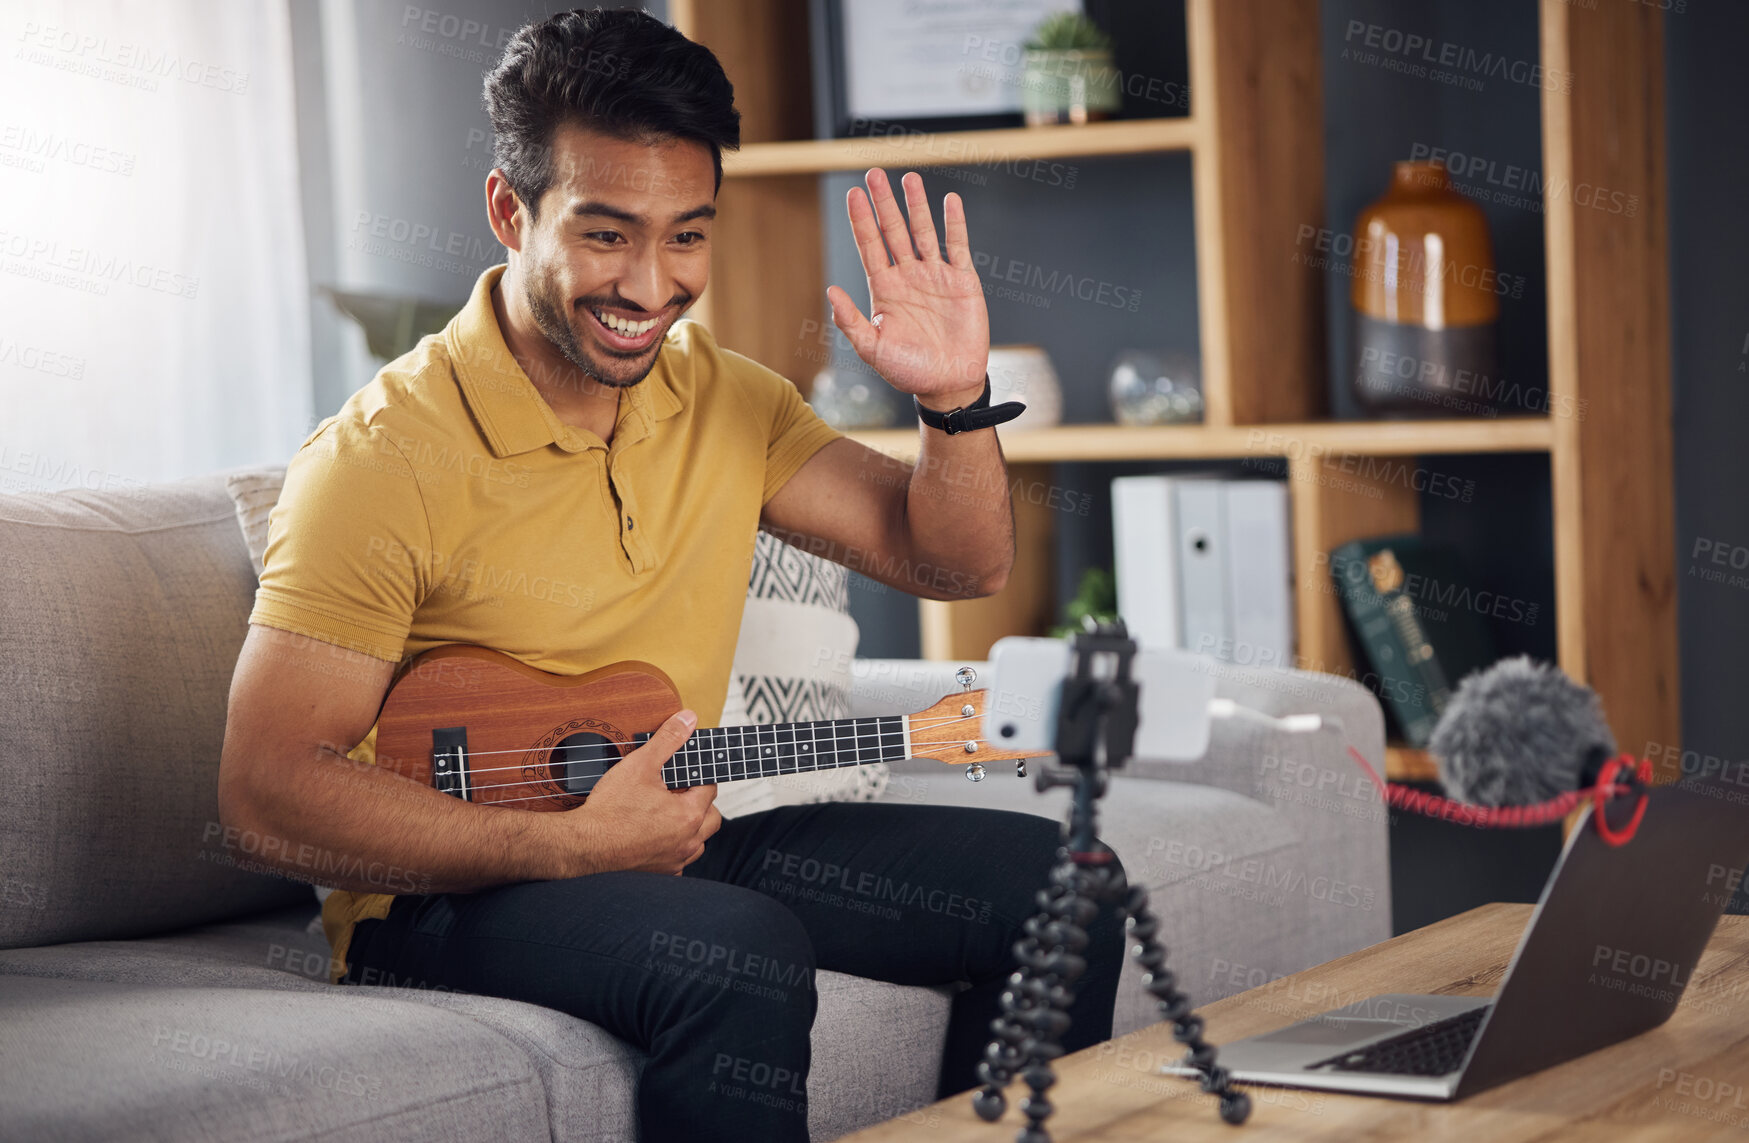 Buy stock photo Podcast, guitar and laptop with a man online to wave and coach during live streaming lesson. Asian male person happy on home sofa with a ukulele as content creator teaching music on education blog